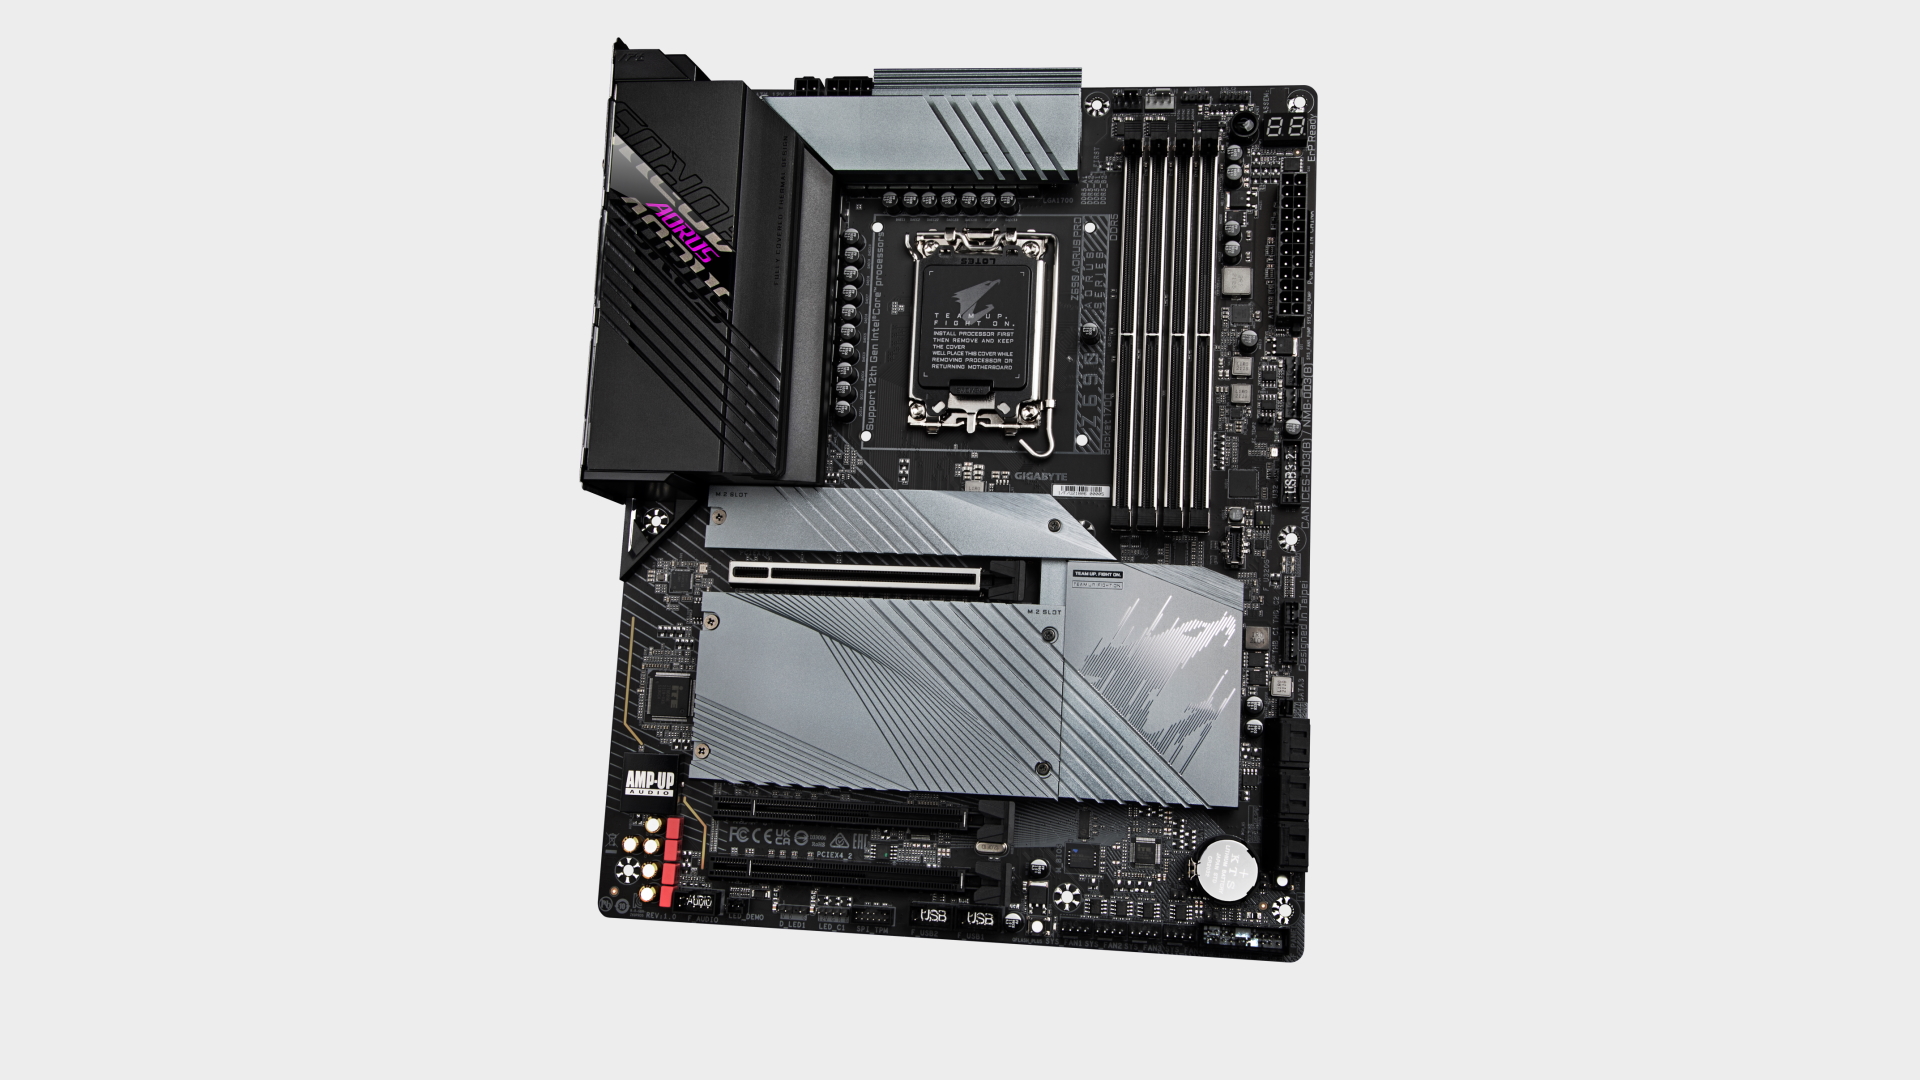 Image of the Gigabyte Z690 Aorus Pro motherboard.